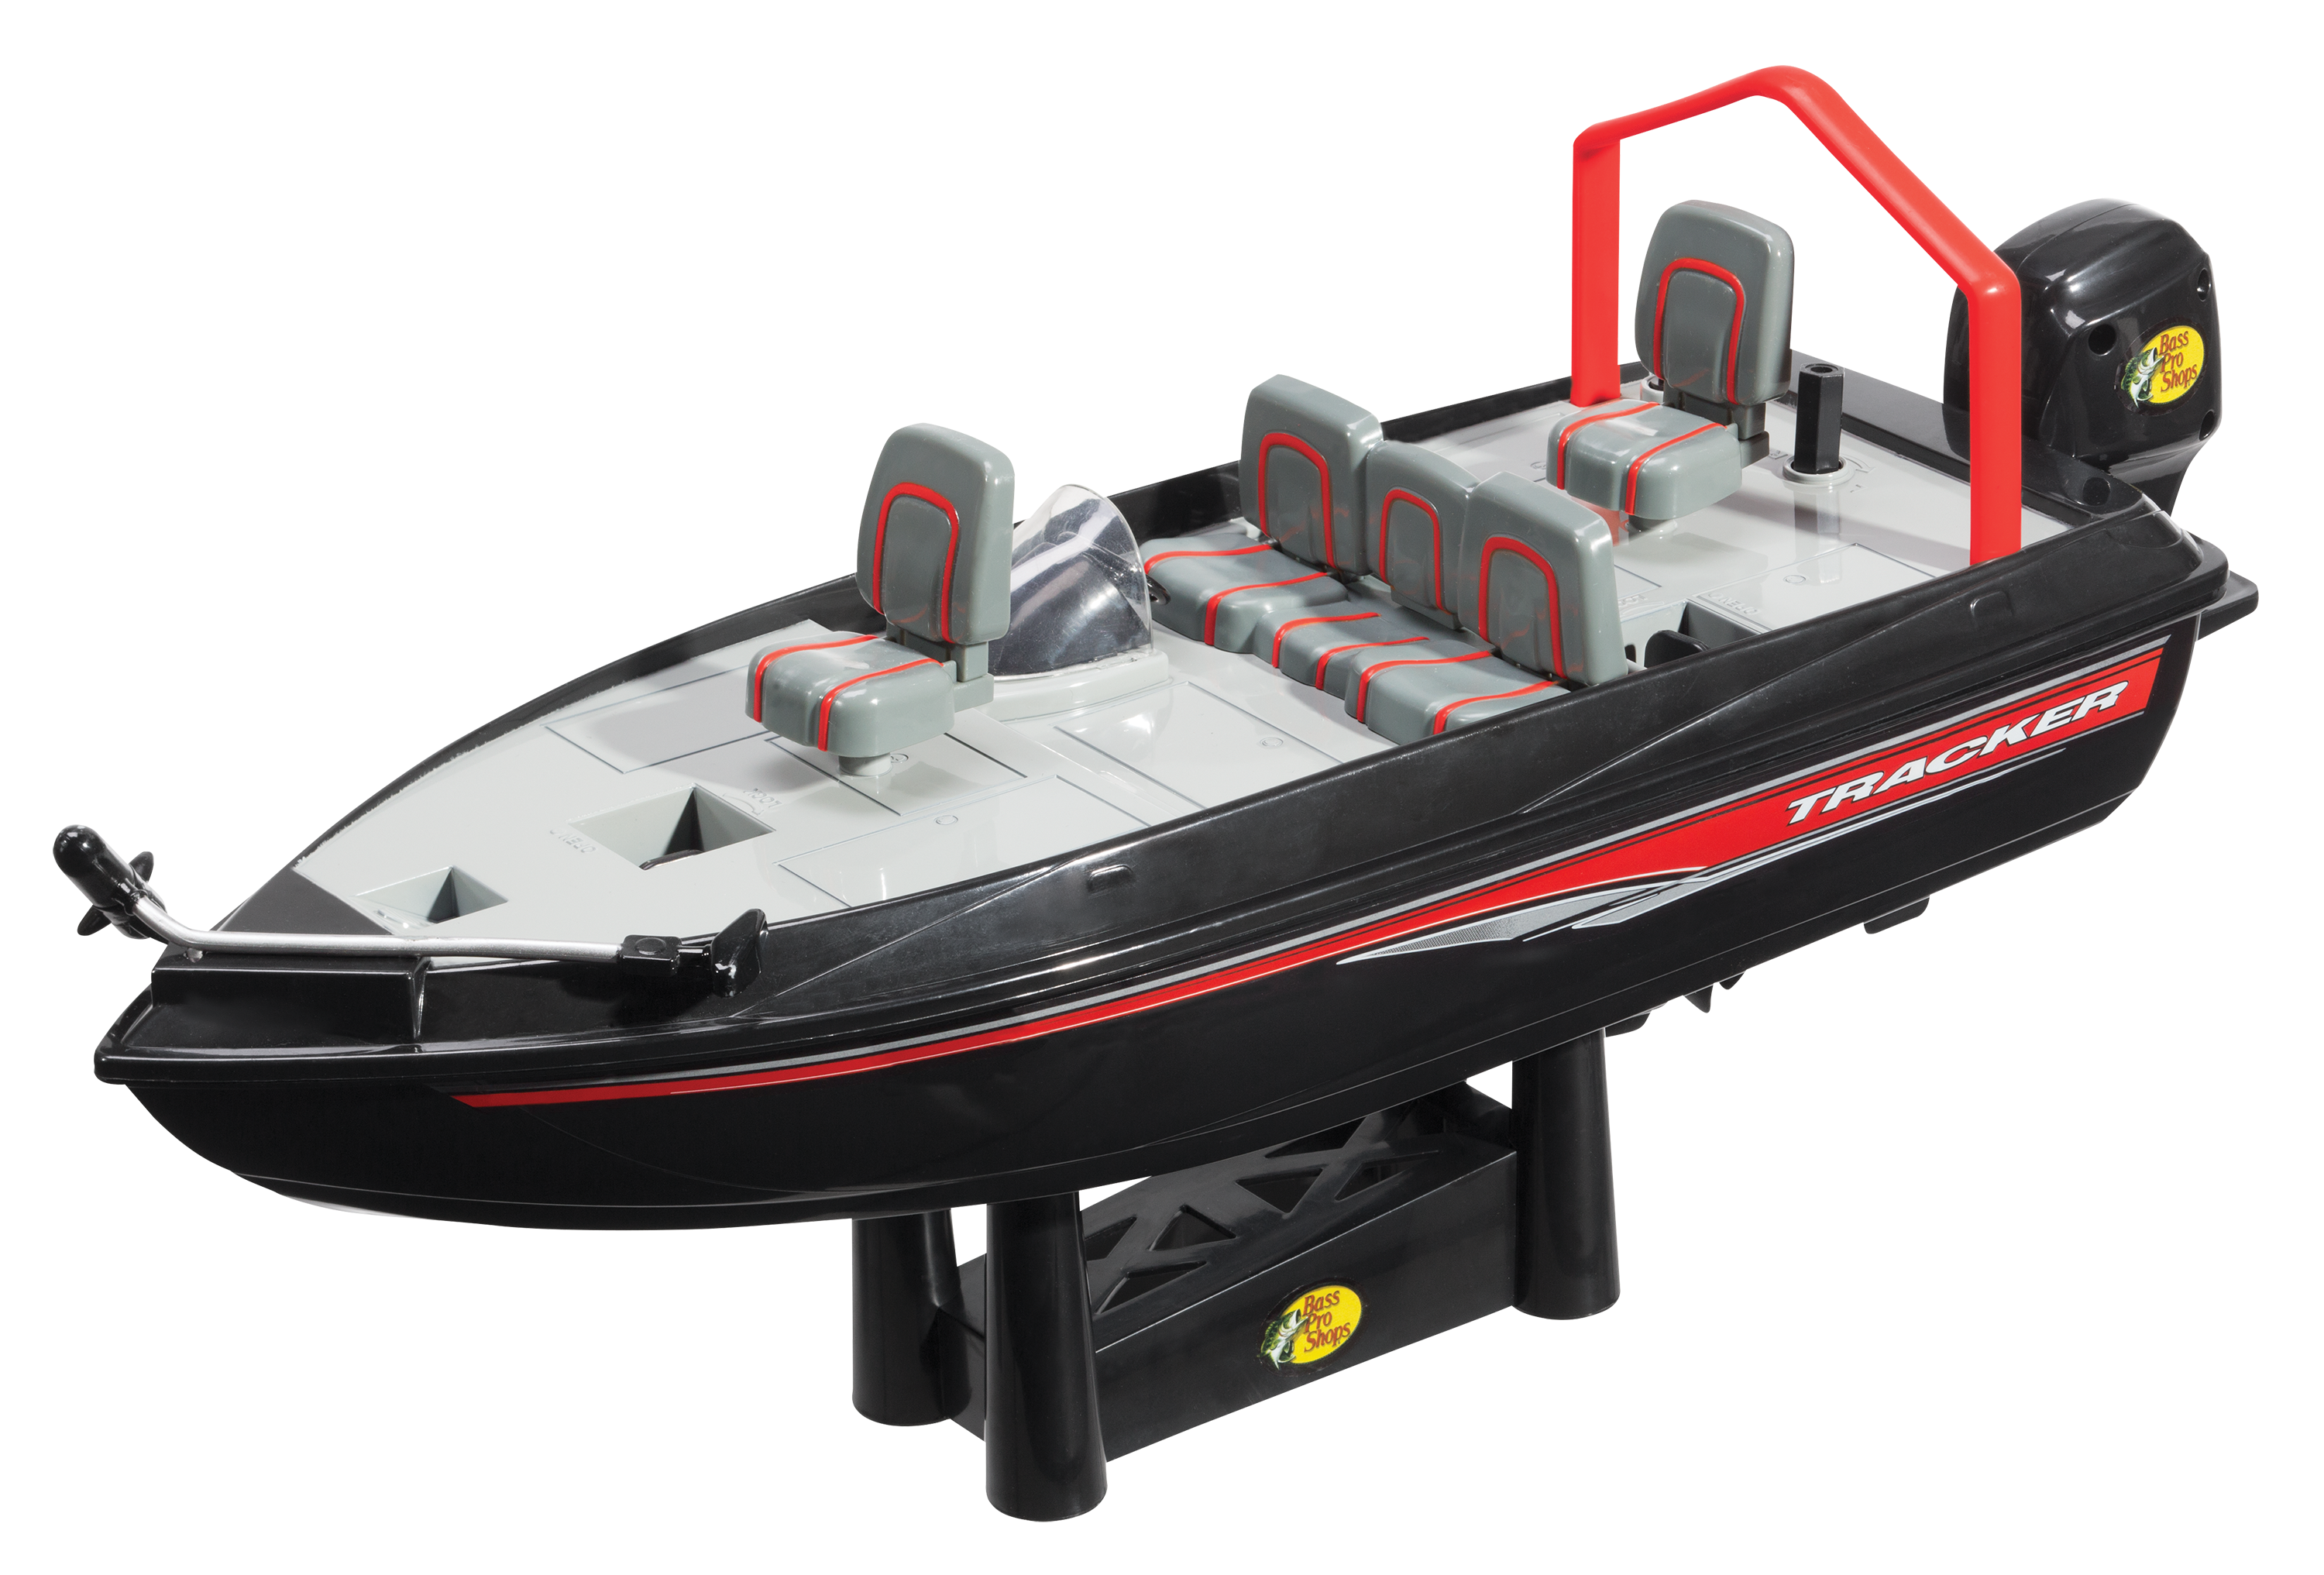 LIMEID Rc Fishing Boats for Fishing-Rc Fishing Bait Boat 2.4Ghz